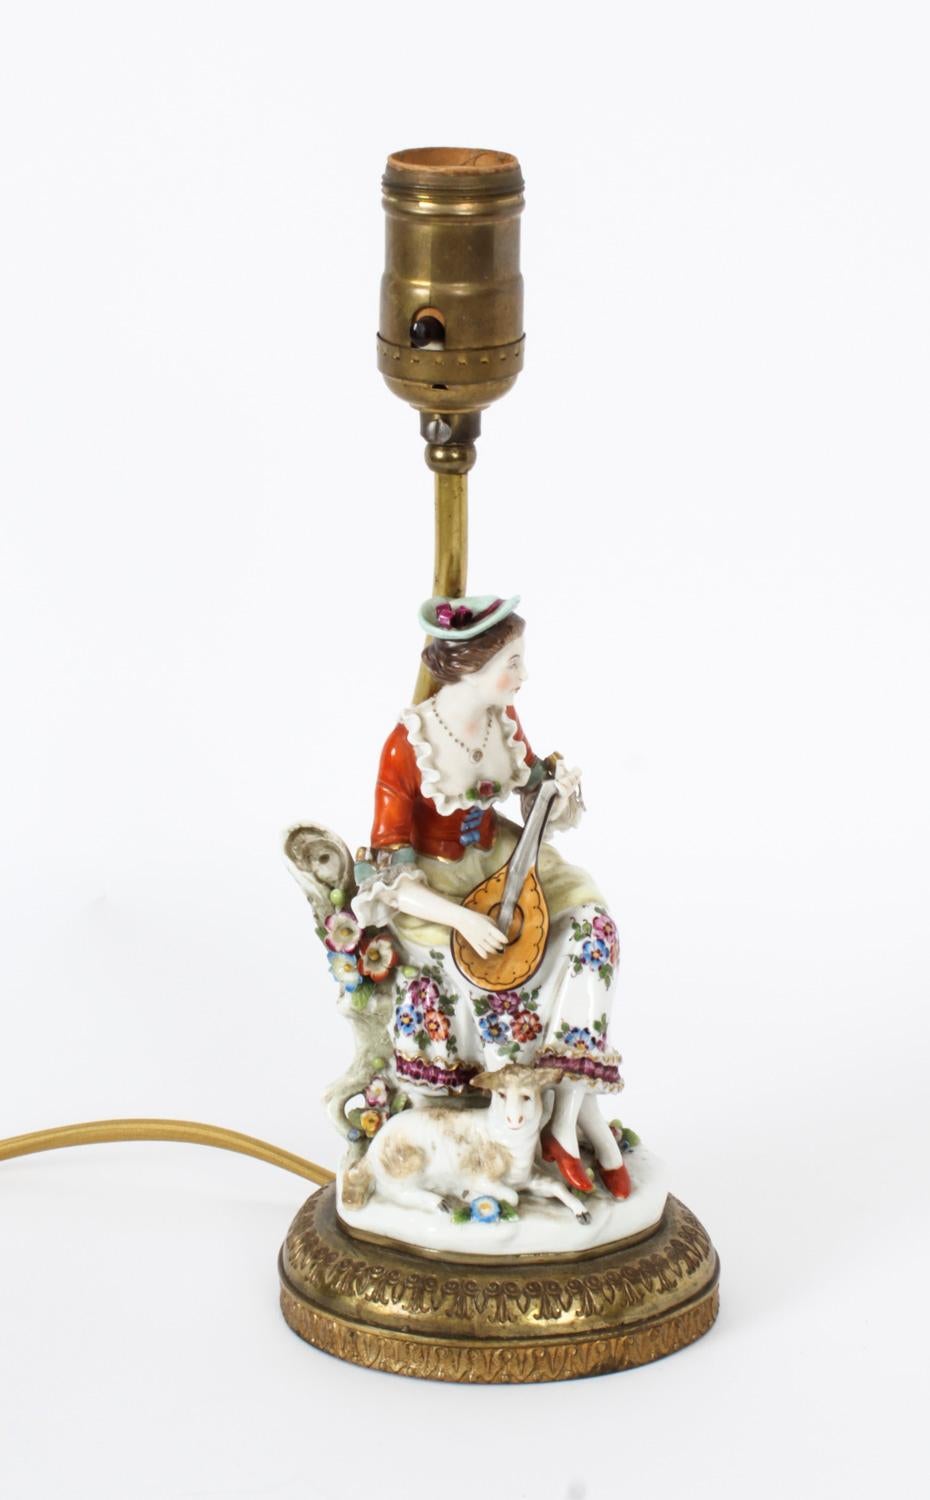 This is a beautiful Vintage pair of Dresden porcelain table lamps, mid 20th century in date.

The figural lamps feature a country lady and gentleman in period costume seated with lambs while playing a mandoline and a flute.

They are a